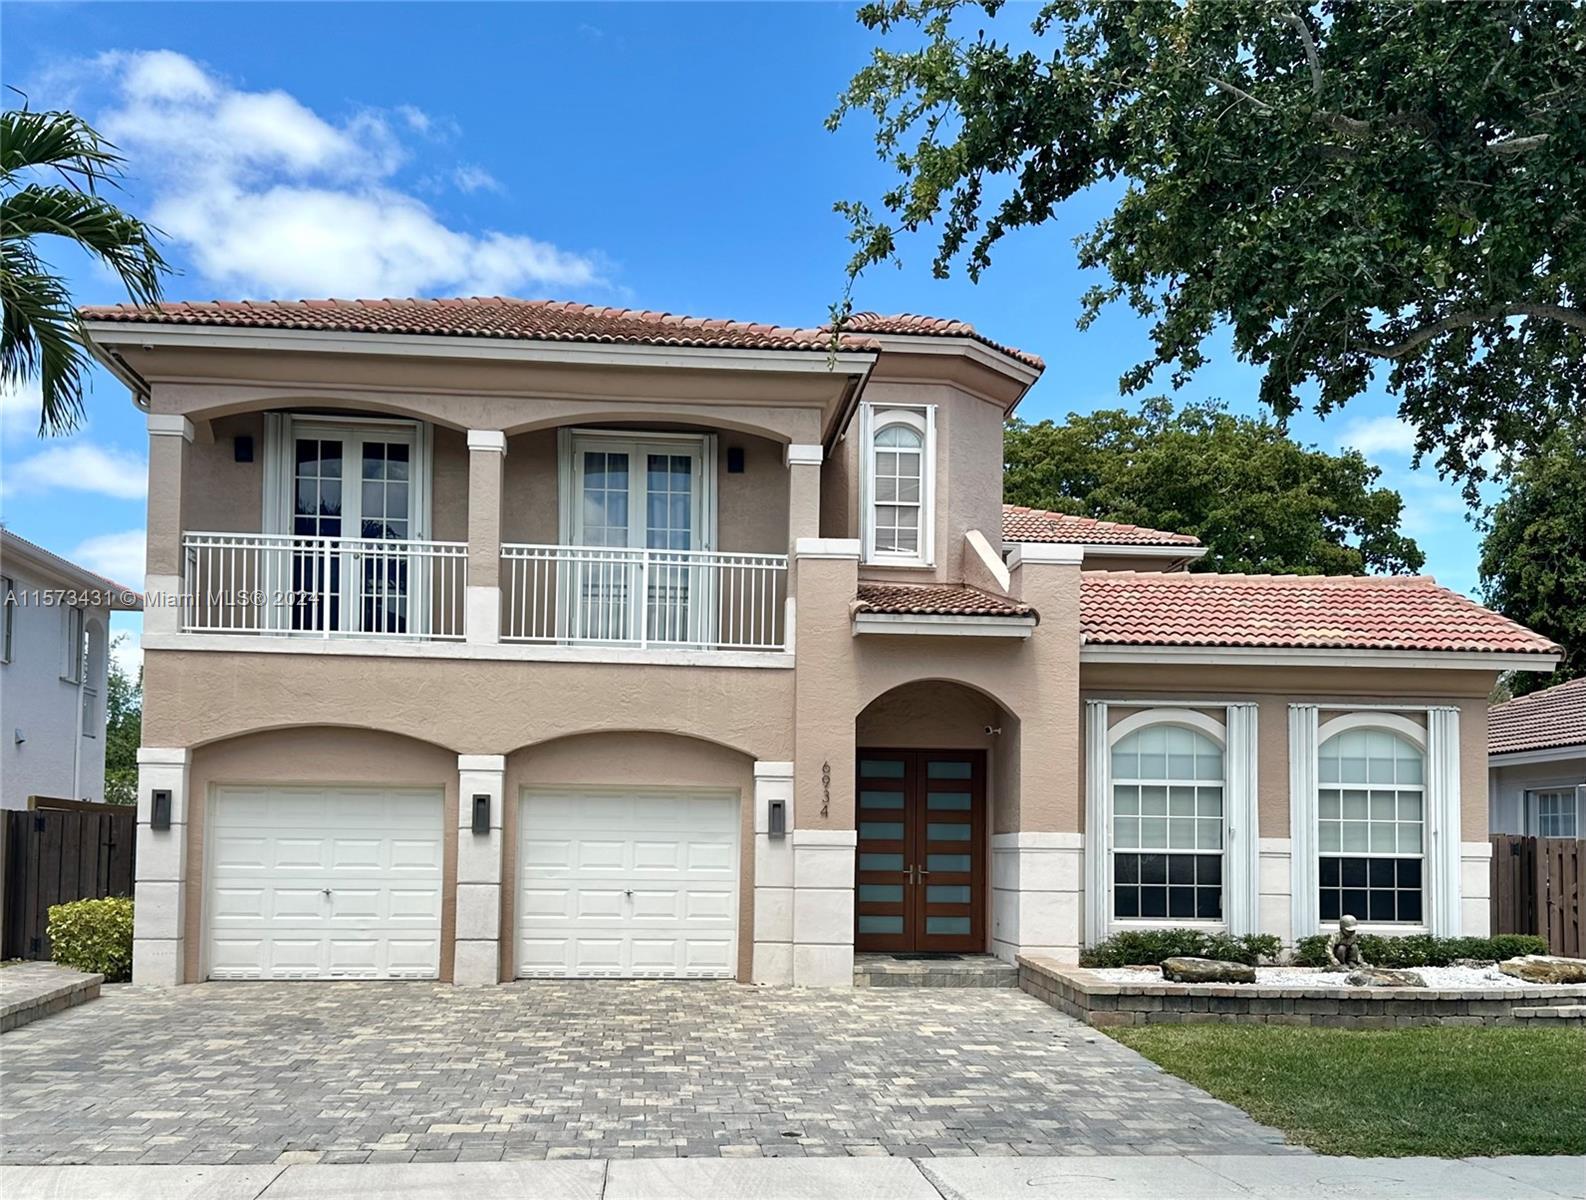 Introducing a beautiful two-story single-family home located in a prestigious area at Doral, recentl